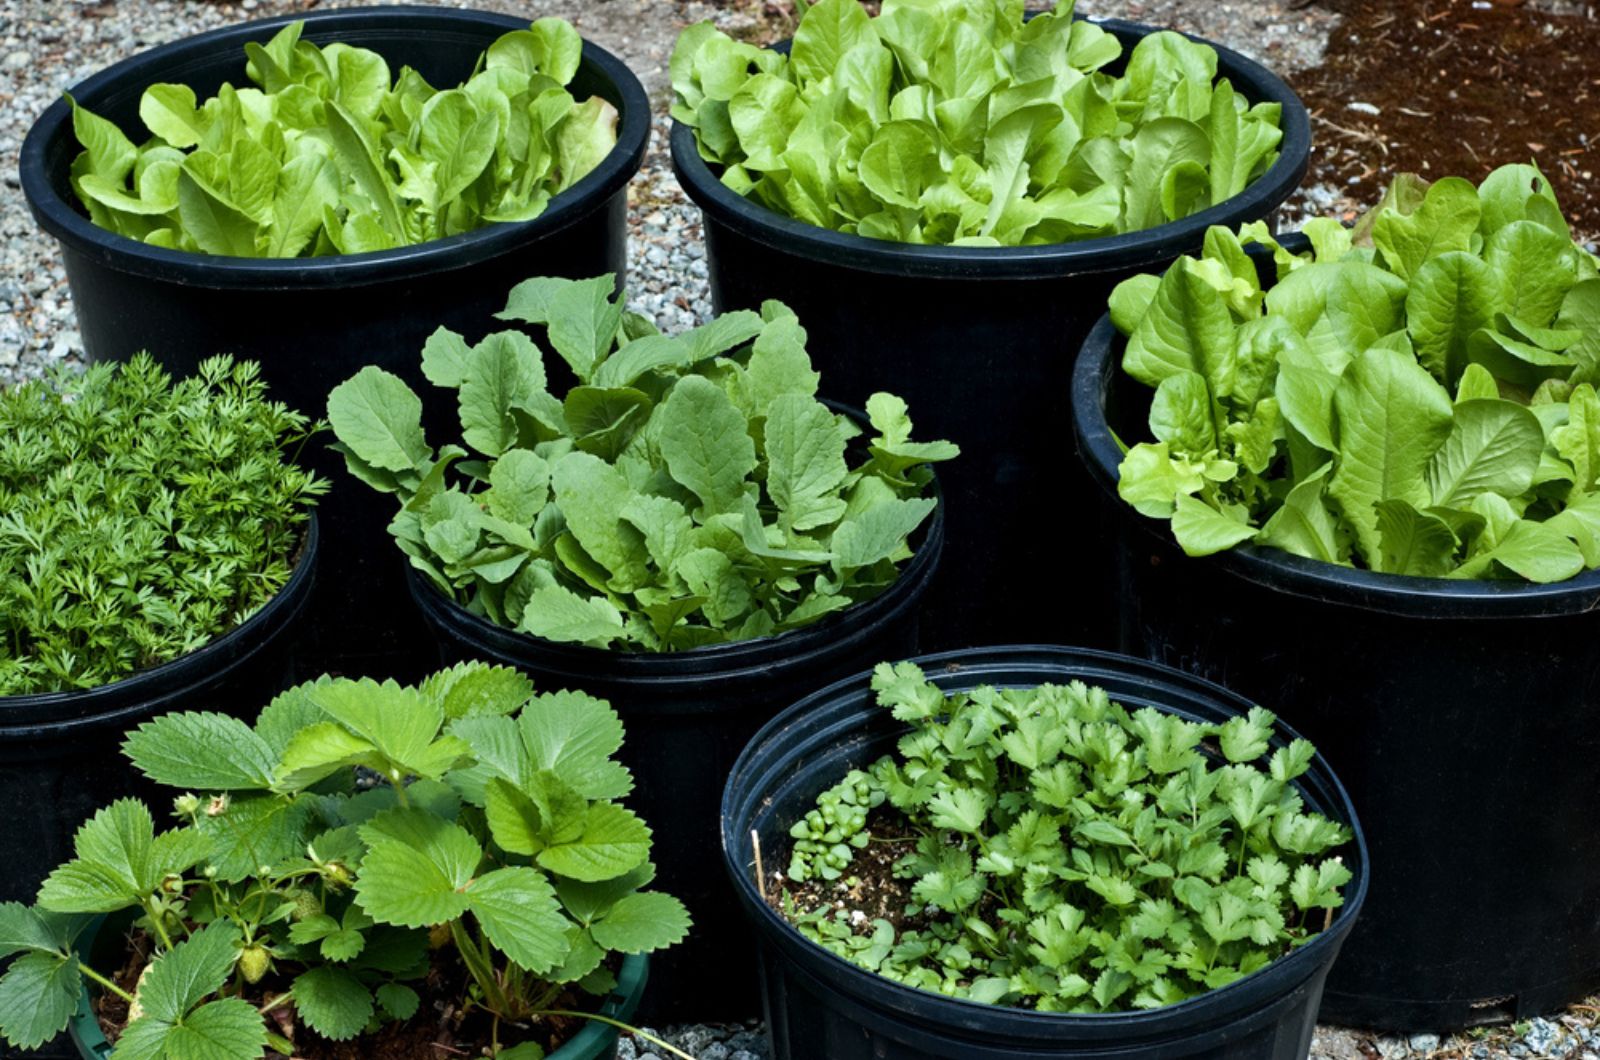 Salad greens, herbs and vegetables grown in large black pots